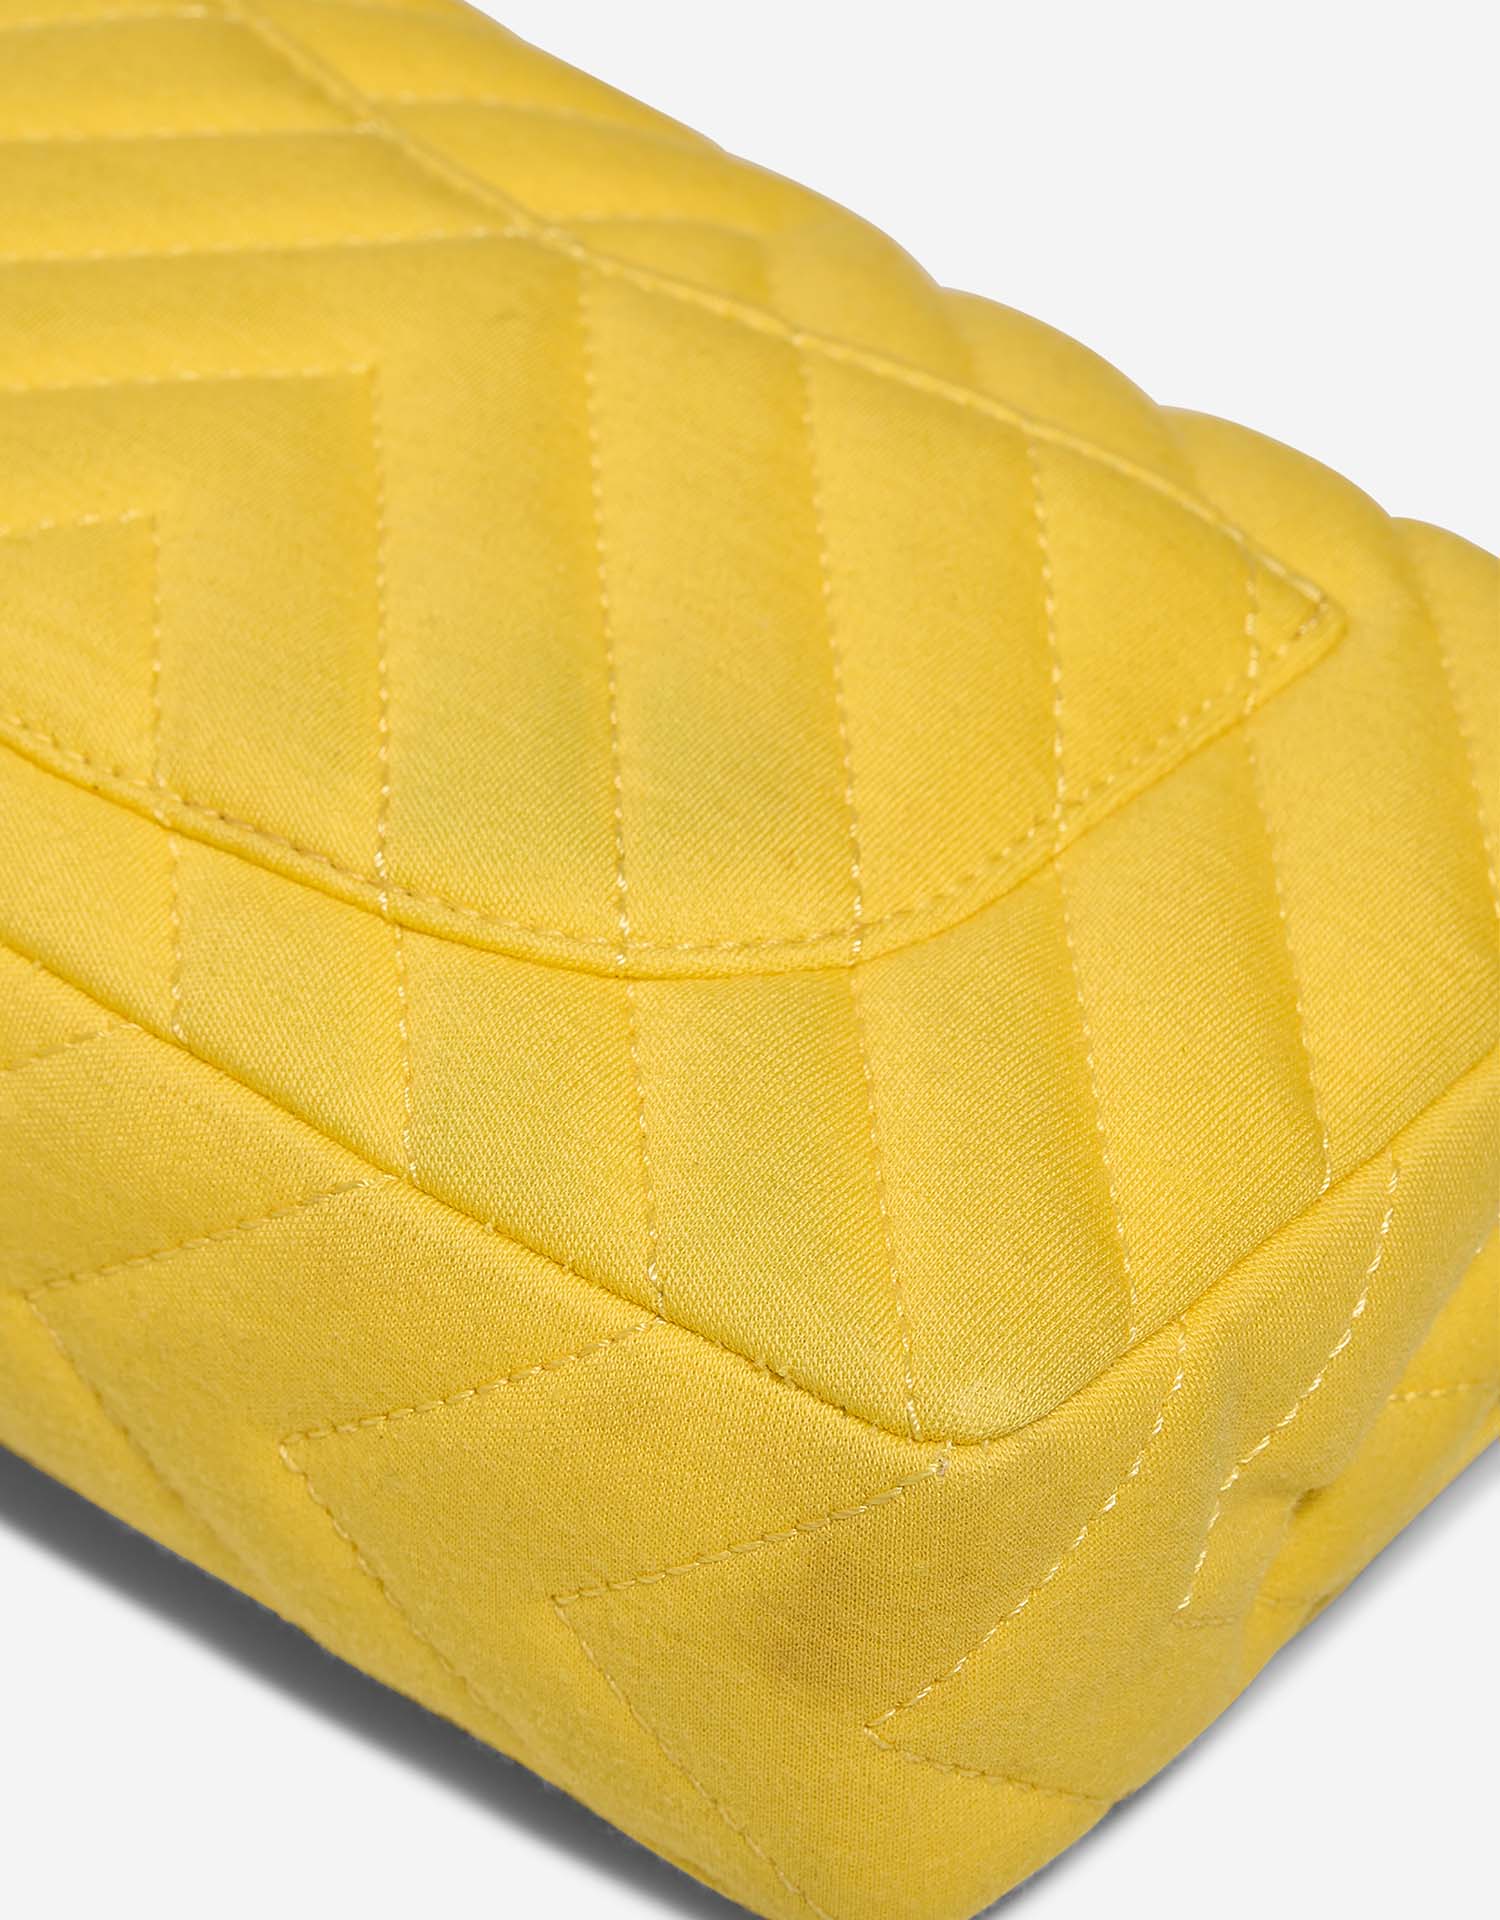 Chanel Timeless Medium Yellow signs of wear | Sell your designer bag on Saclab.com